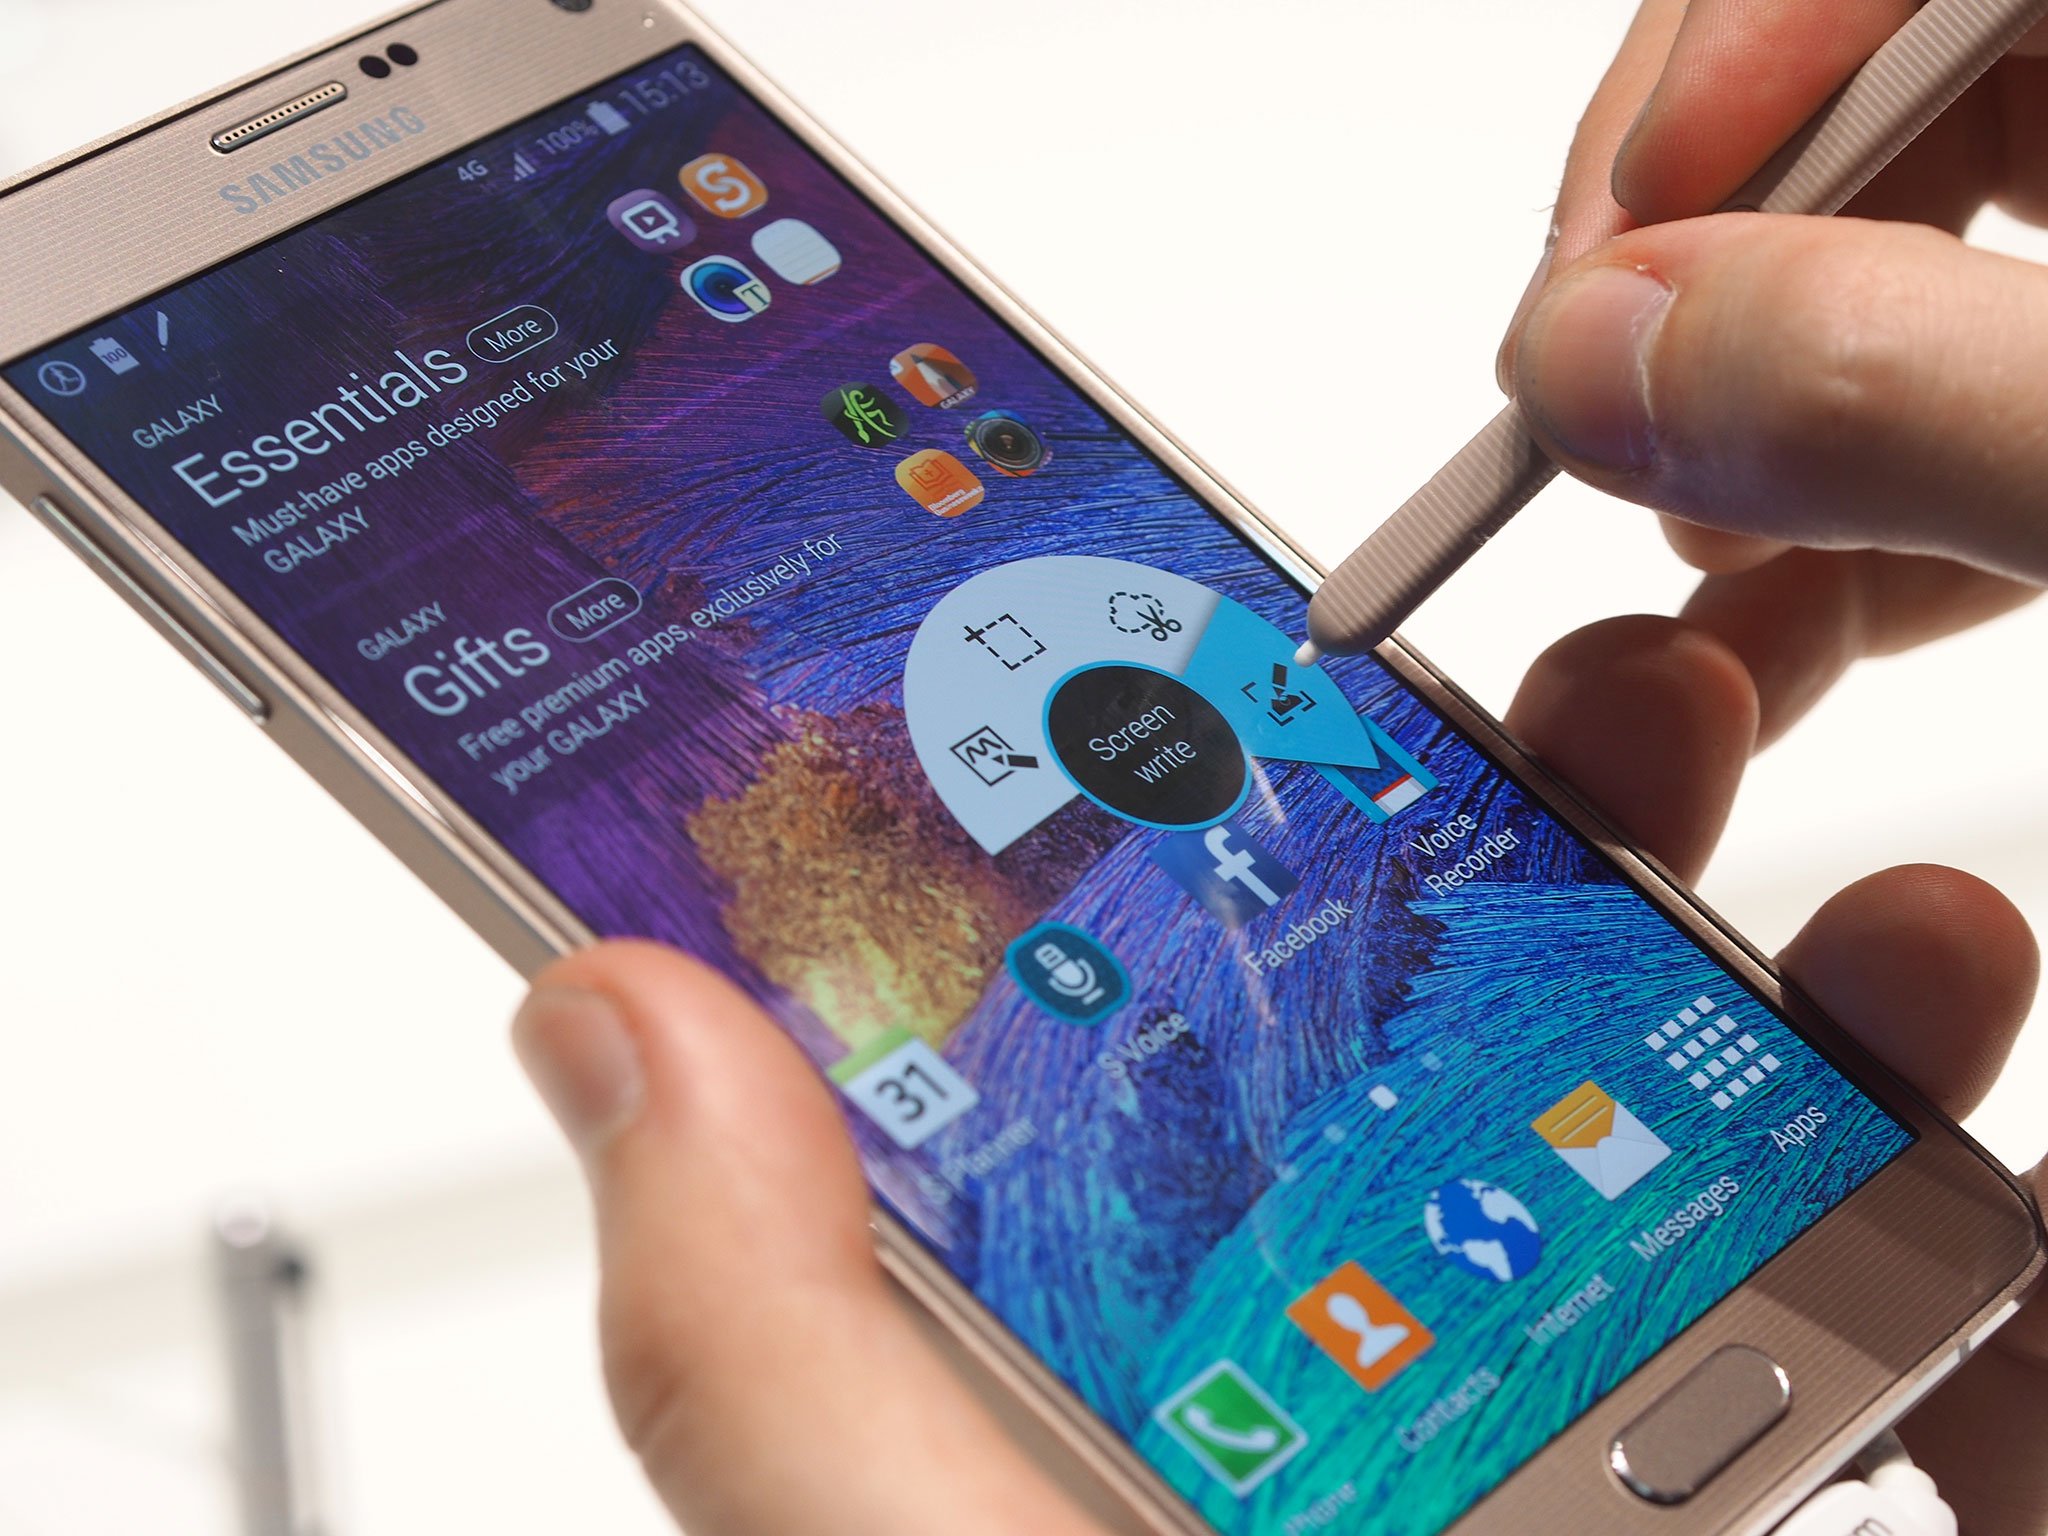 How To Take A Screenshot On The Samsung Galaxy Note 4 Android Central